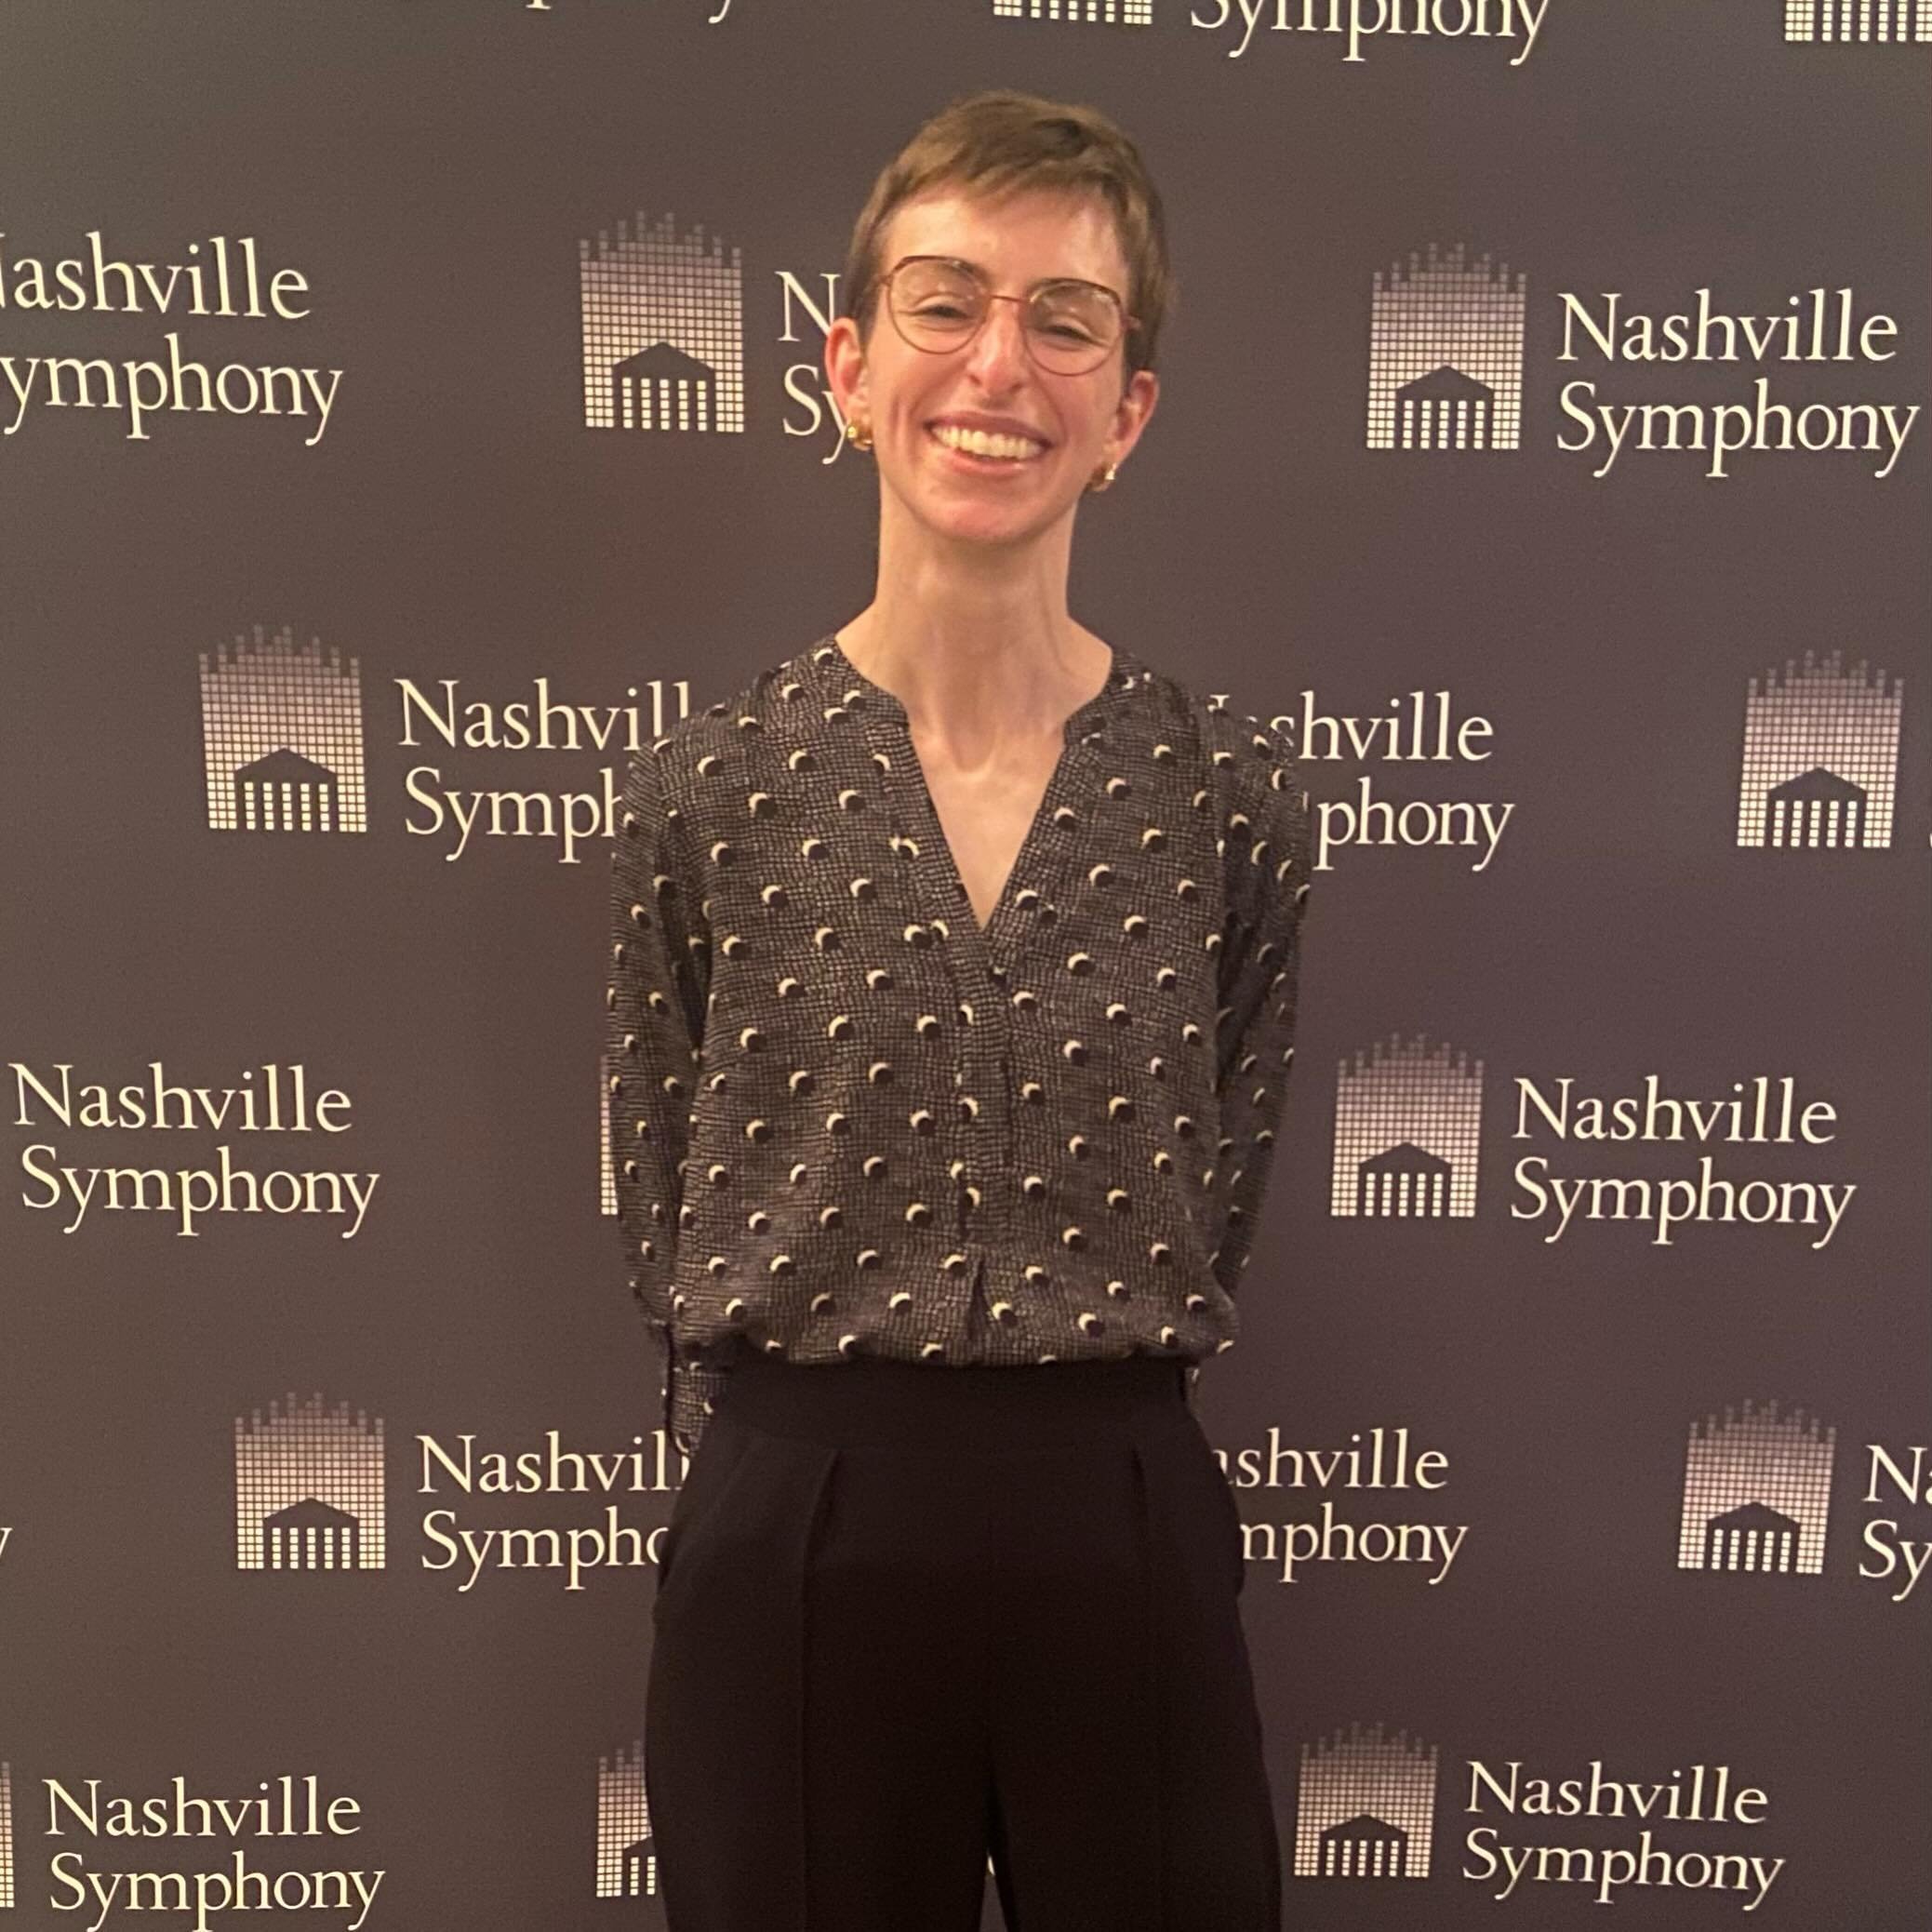 I am beyond thrilled to announce that I have won a Librarian position with the Nashville Symphony Orchestra! As such, I will be taking a hiatus from Sunshine Reeds. I am proud to recommend the following reed makers (links to their stores available in